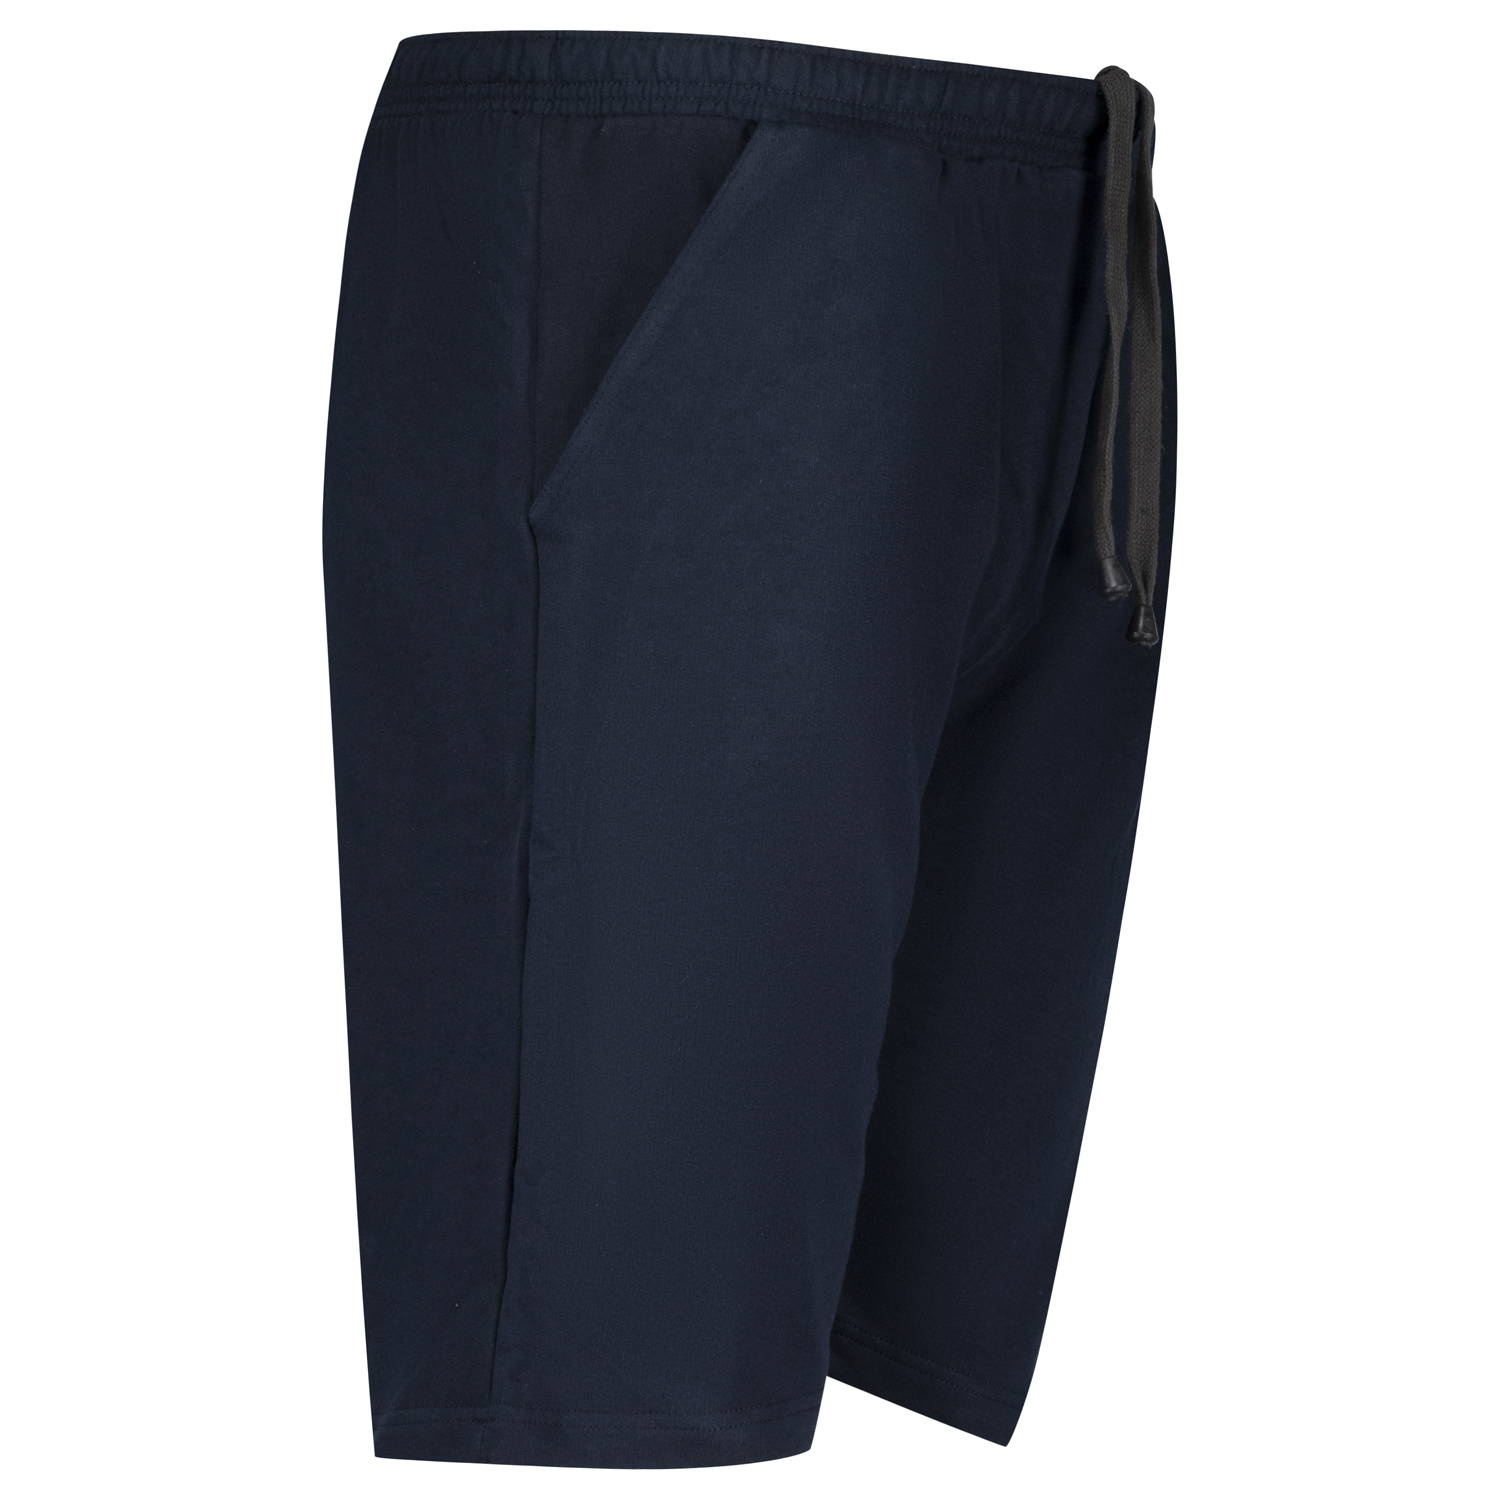 Short jogging trousers in navy up to oversize 14XL by Adamo